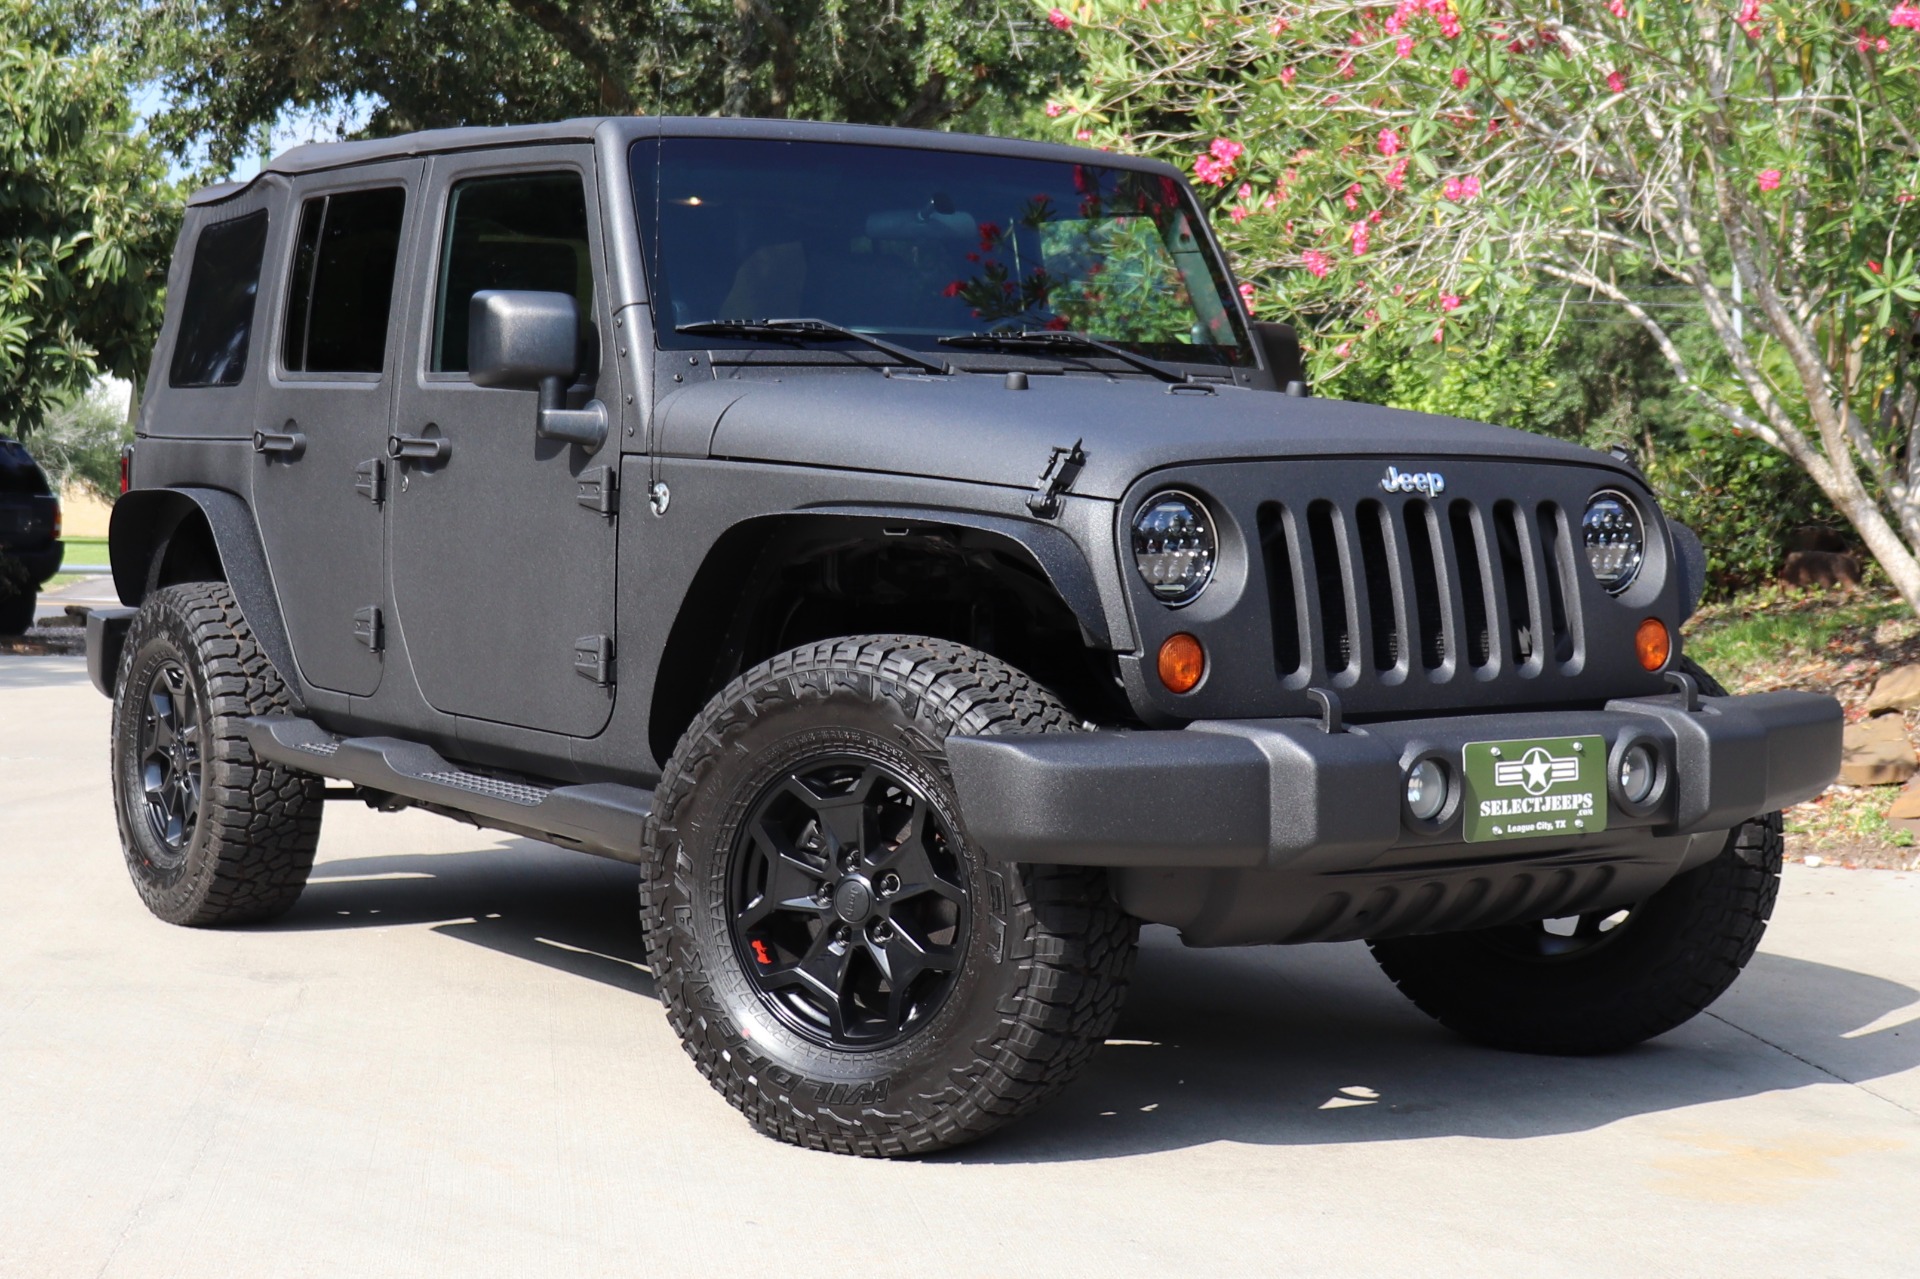 Used 2007 Jeep Wrangler Unlimited Sahara For Sale ($19,995) | Select